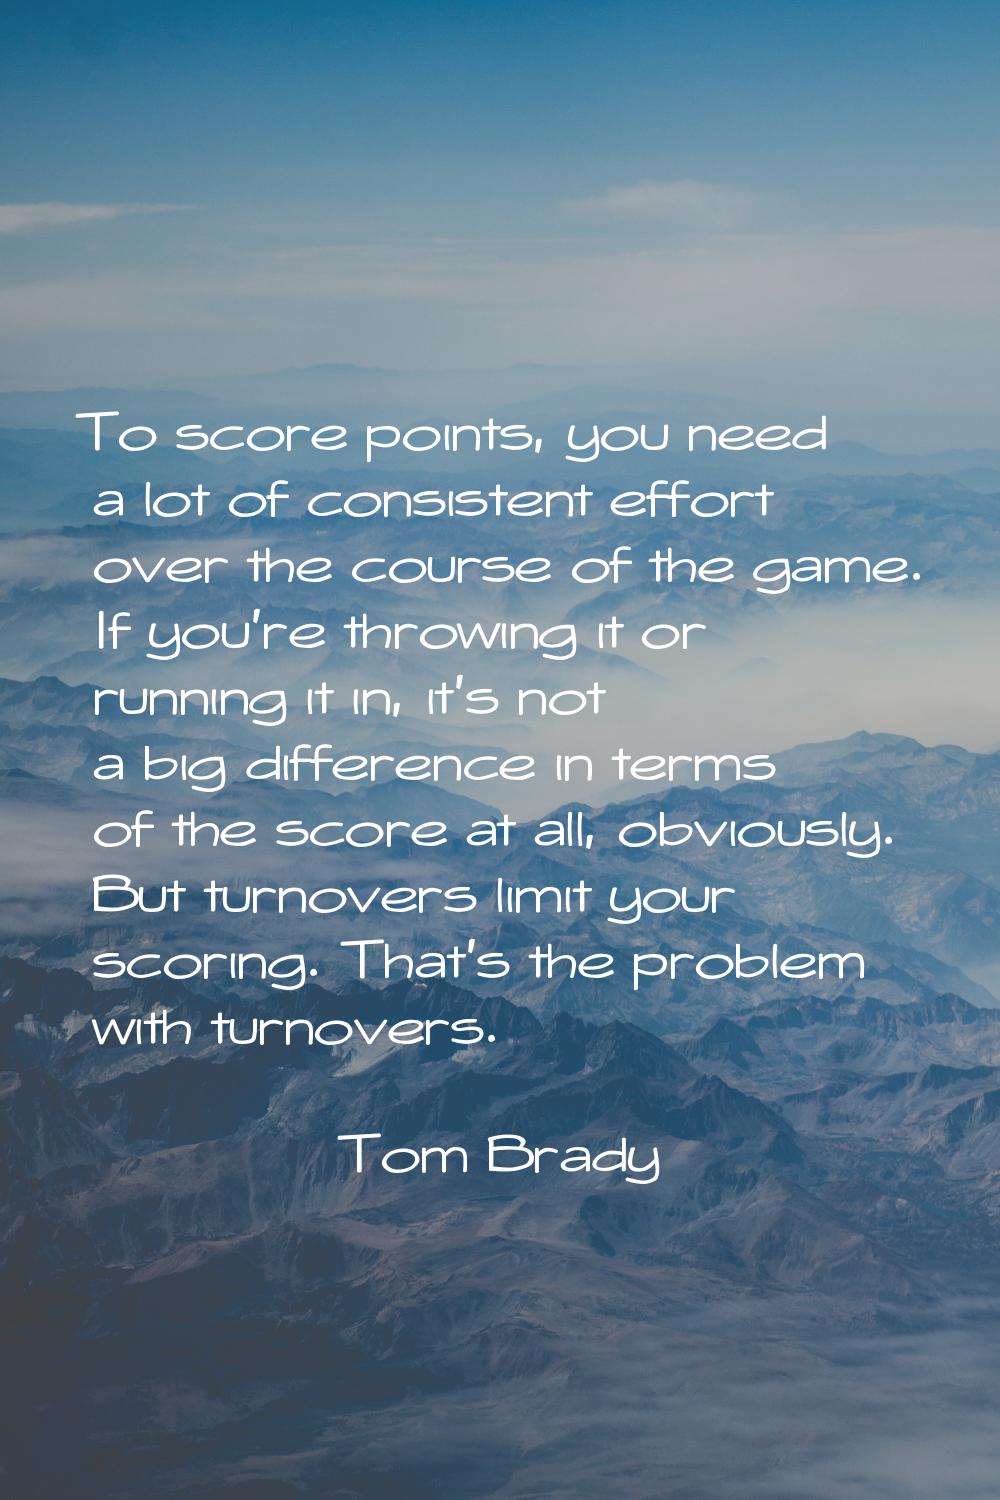 To score points, you need a lot of consistent effort over the course of the game. If you're throwin